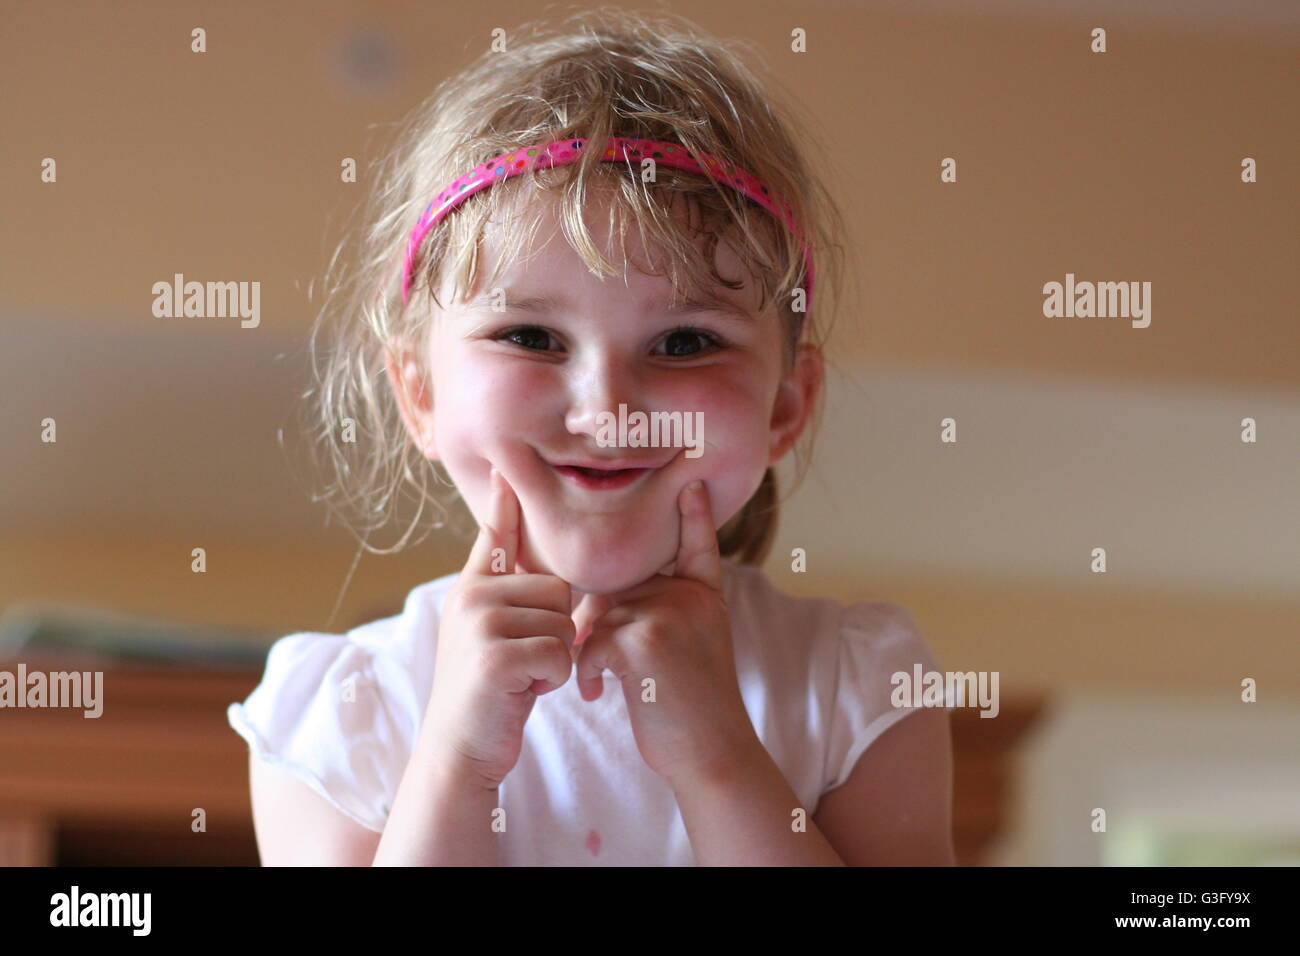 Blonde Little girl child kid having fun playing and messing, making a funny face funny gesture, making a face, pulling faces childhood moment, concept Stock Photo